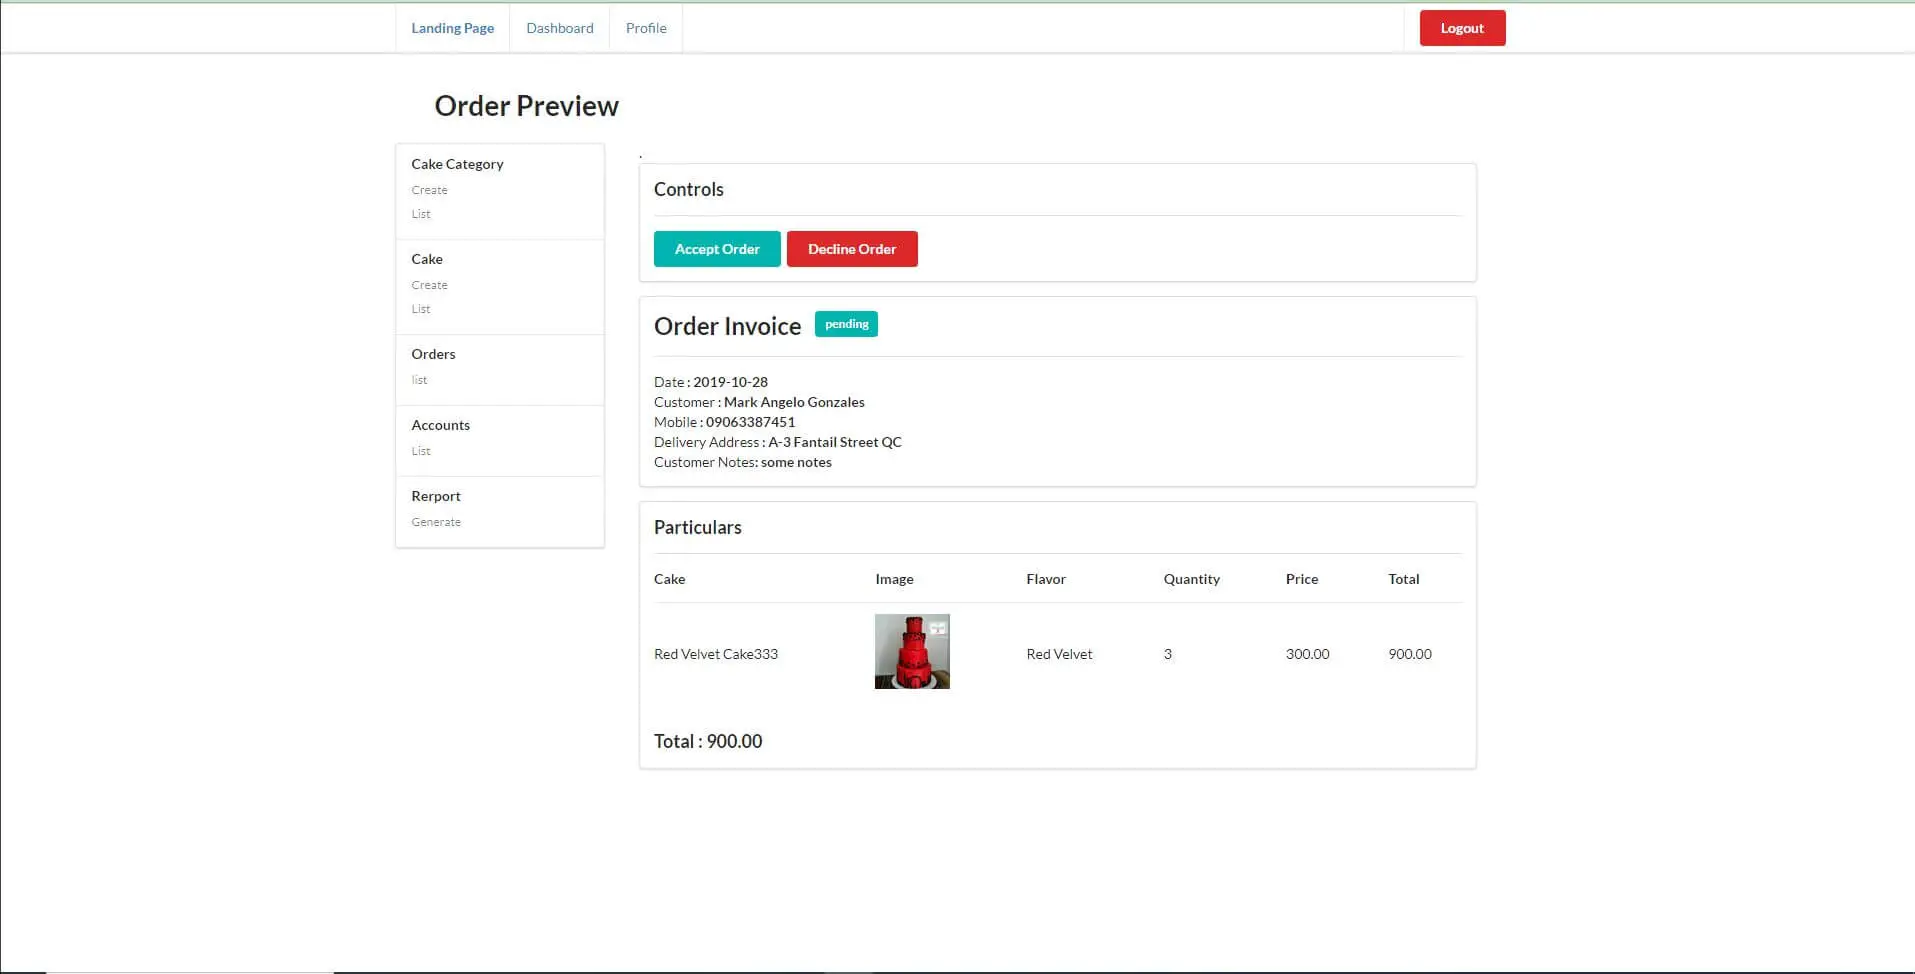 Cake Ordering System - Order Preview Page